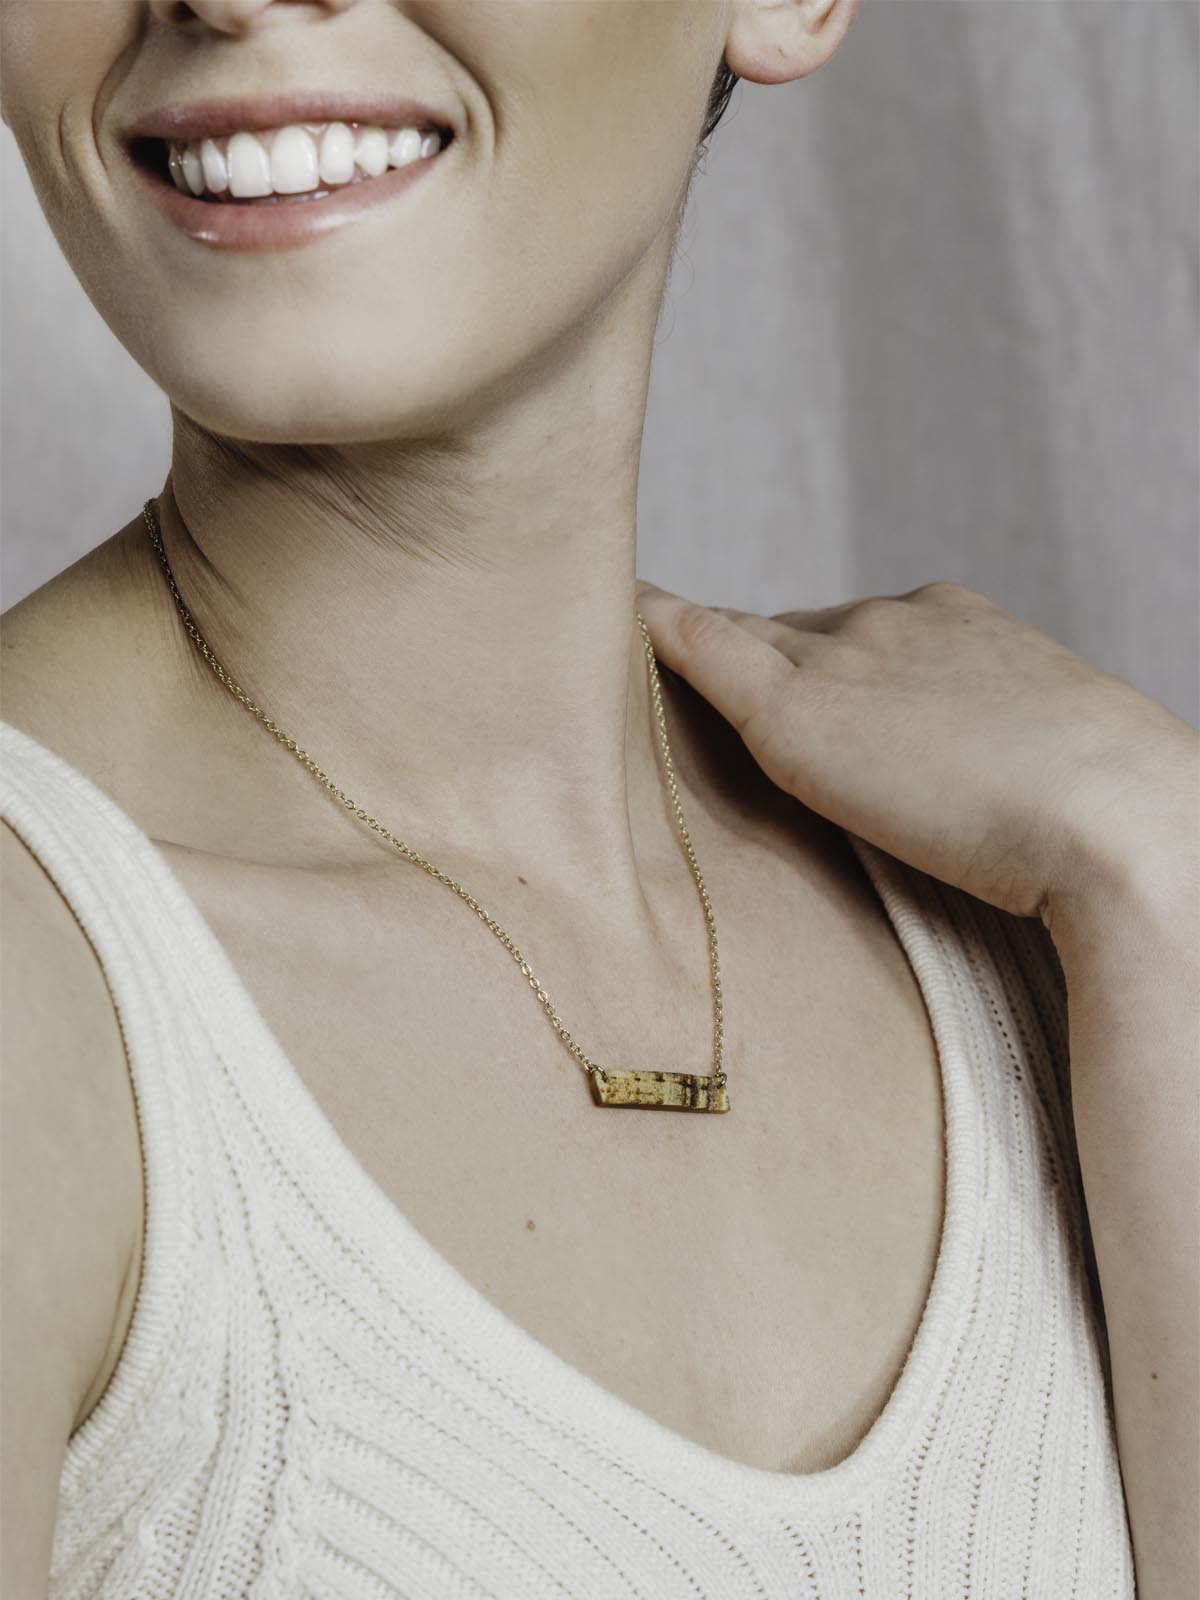 Mode wearing Medium length necklace with gold chain on a white background with small rectangle textured pendant.